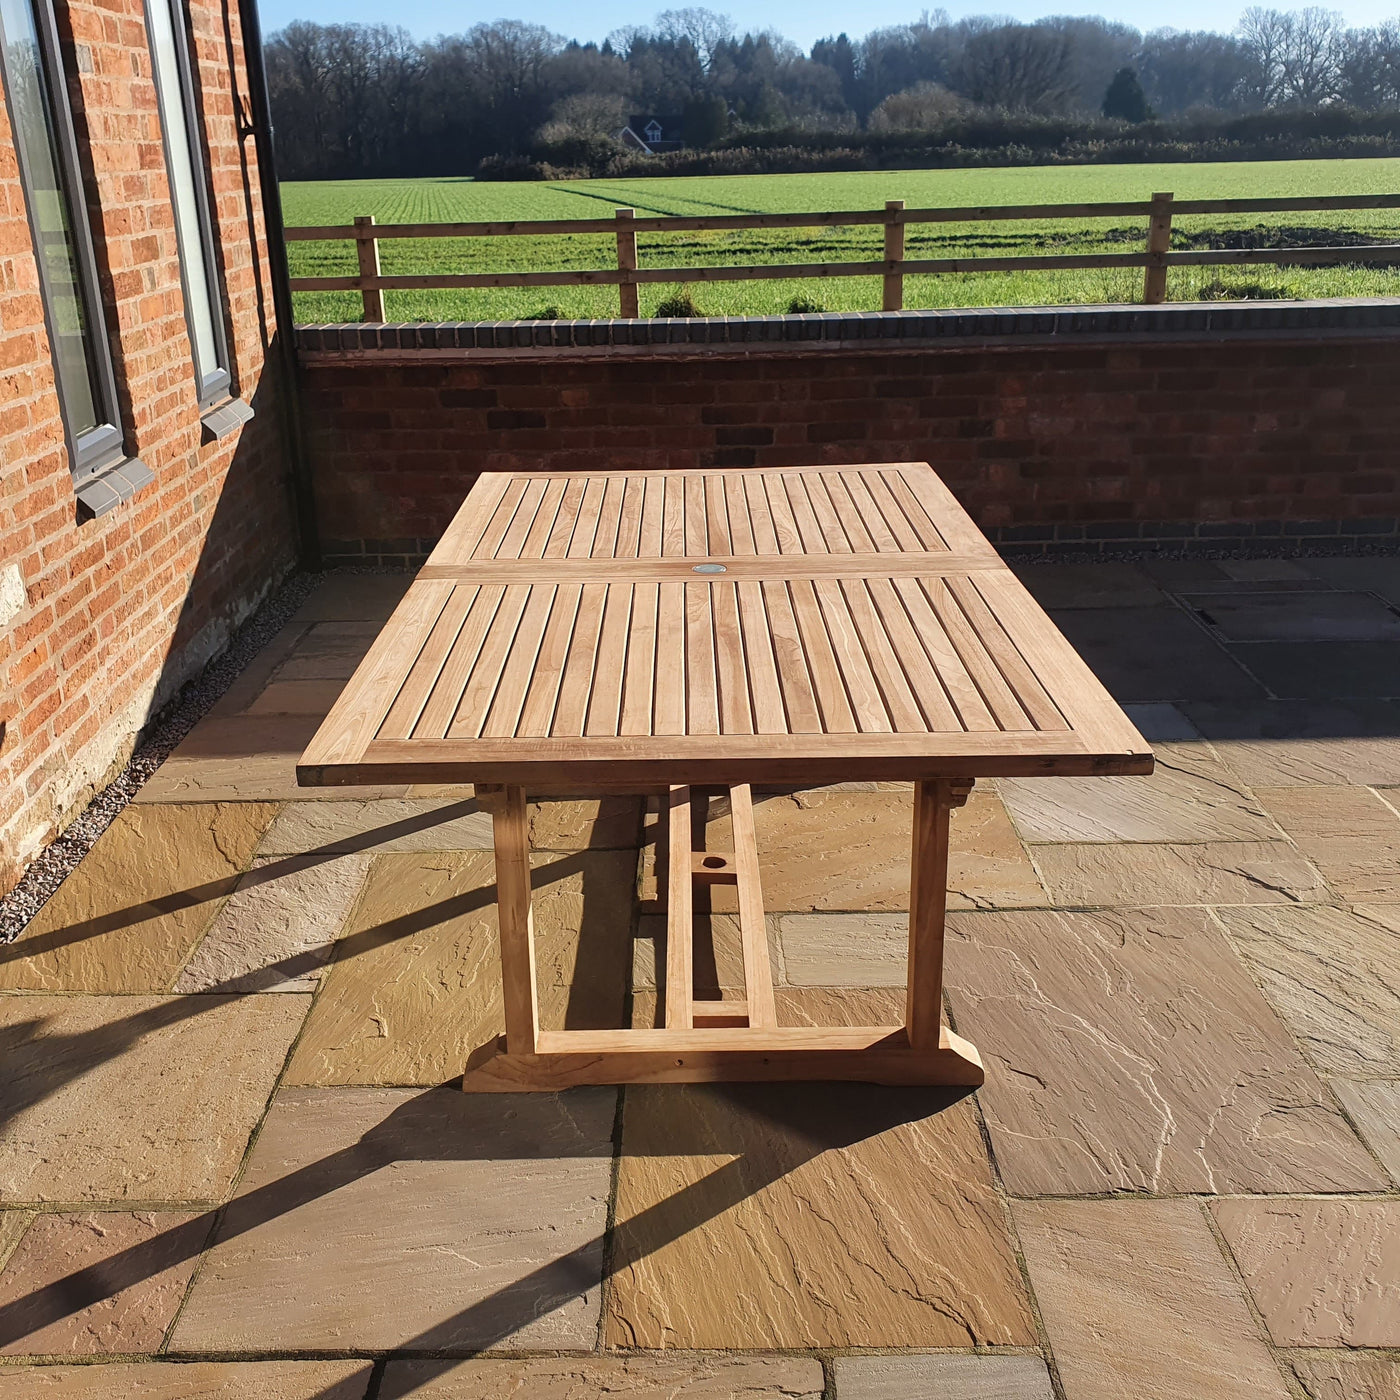 A Teak 2-3m Extending Rectangle Table (10 Seat Oxford Stacking Set) Complete set Cushions included on a stone-paved terrace with a view of a green field and trees under a clear sky.